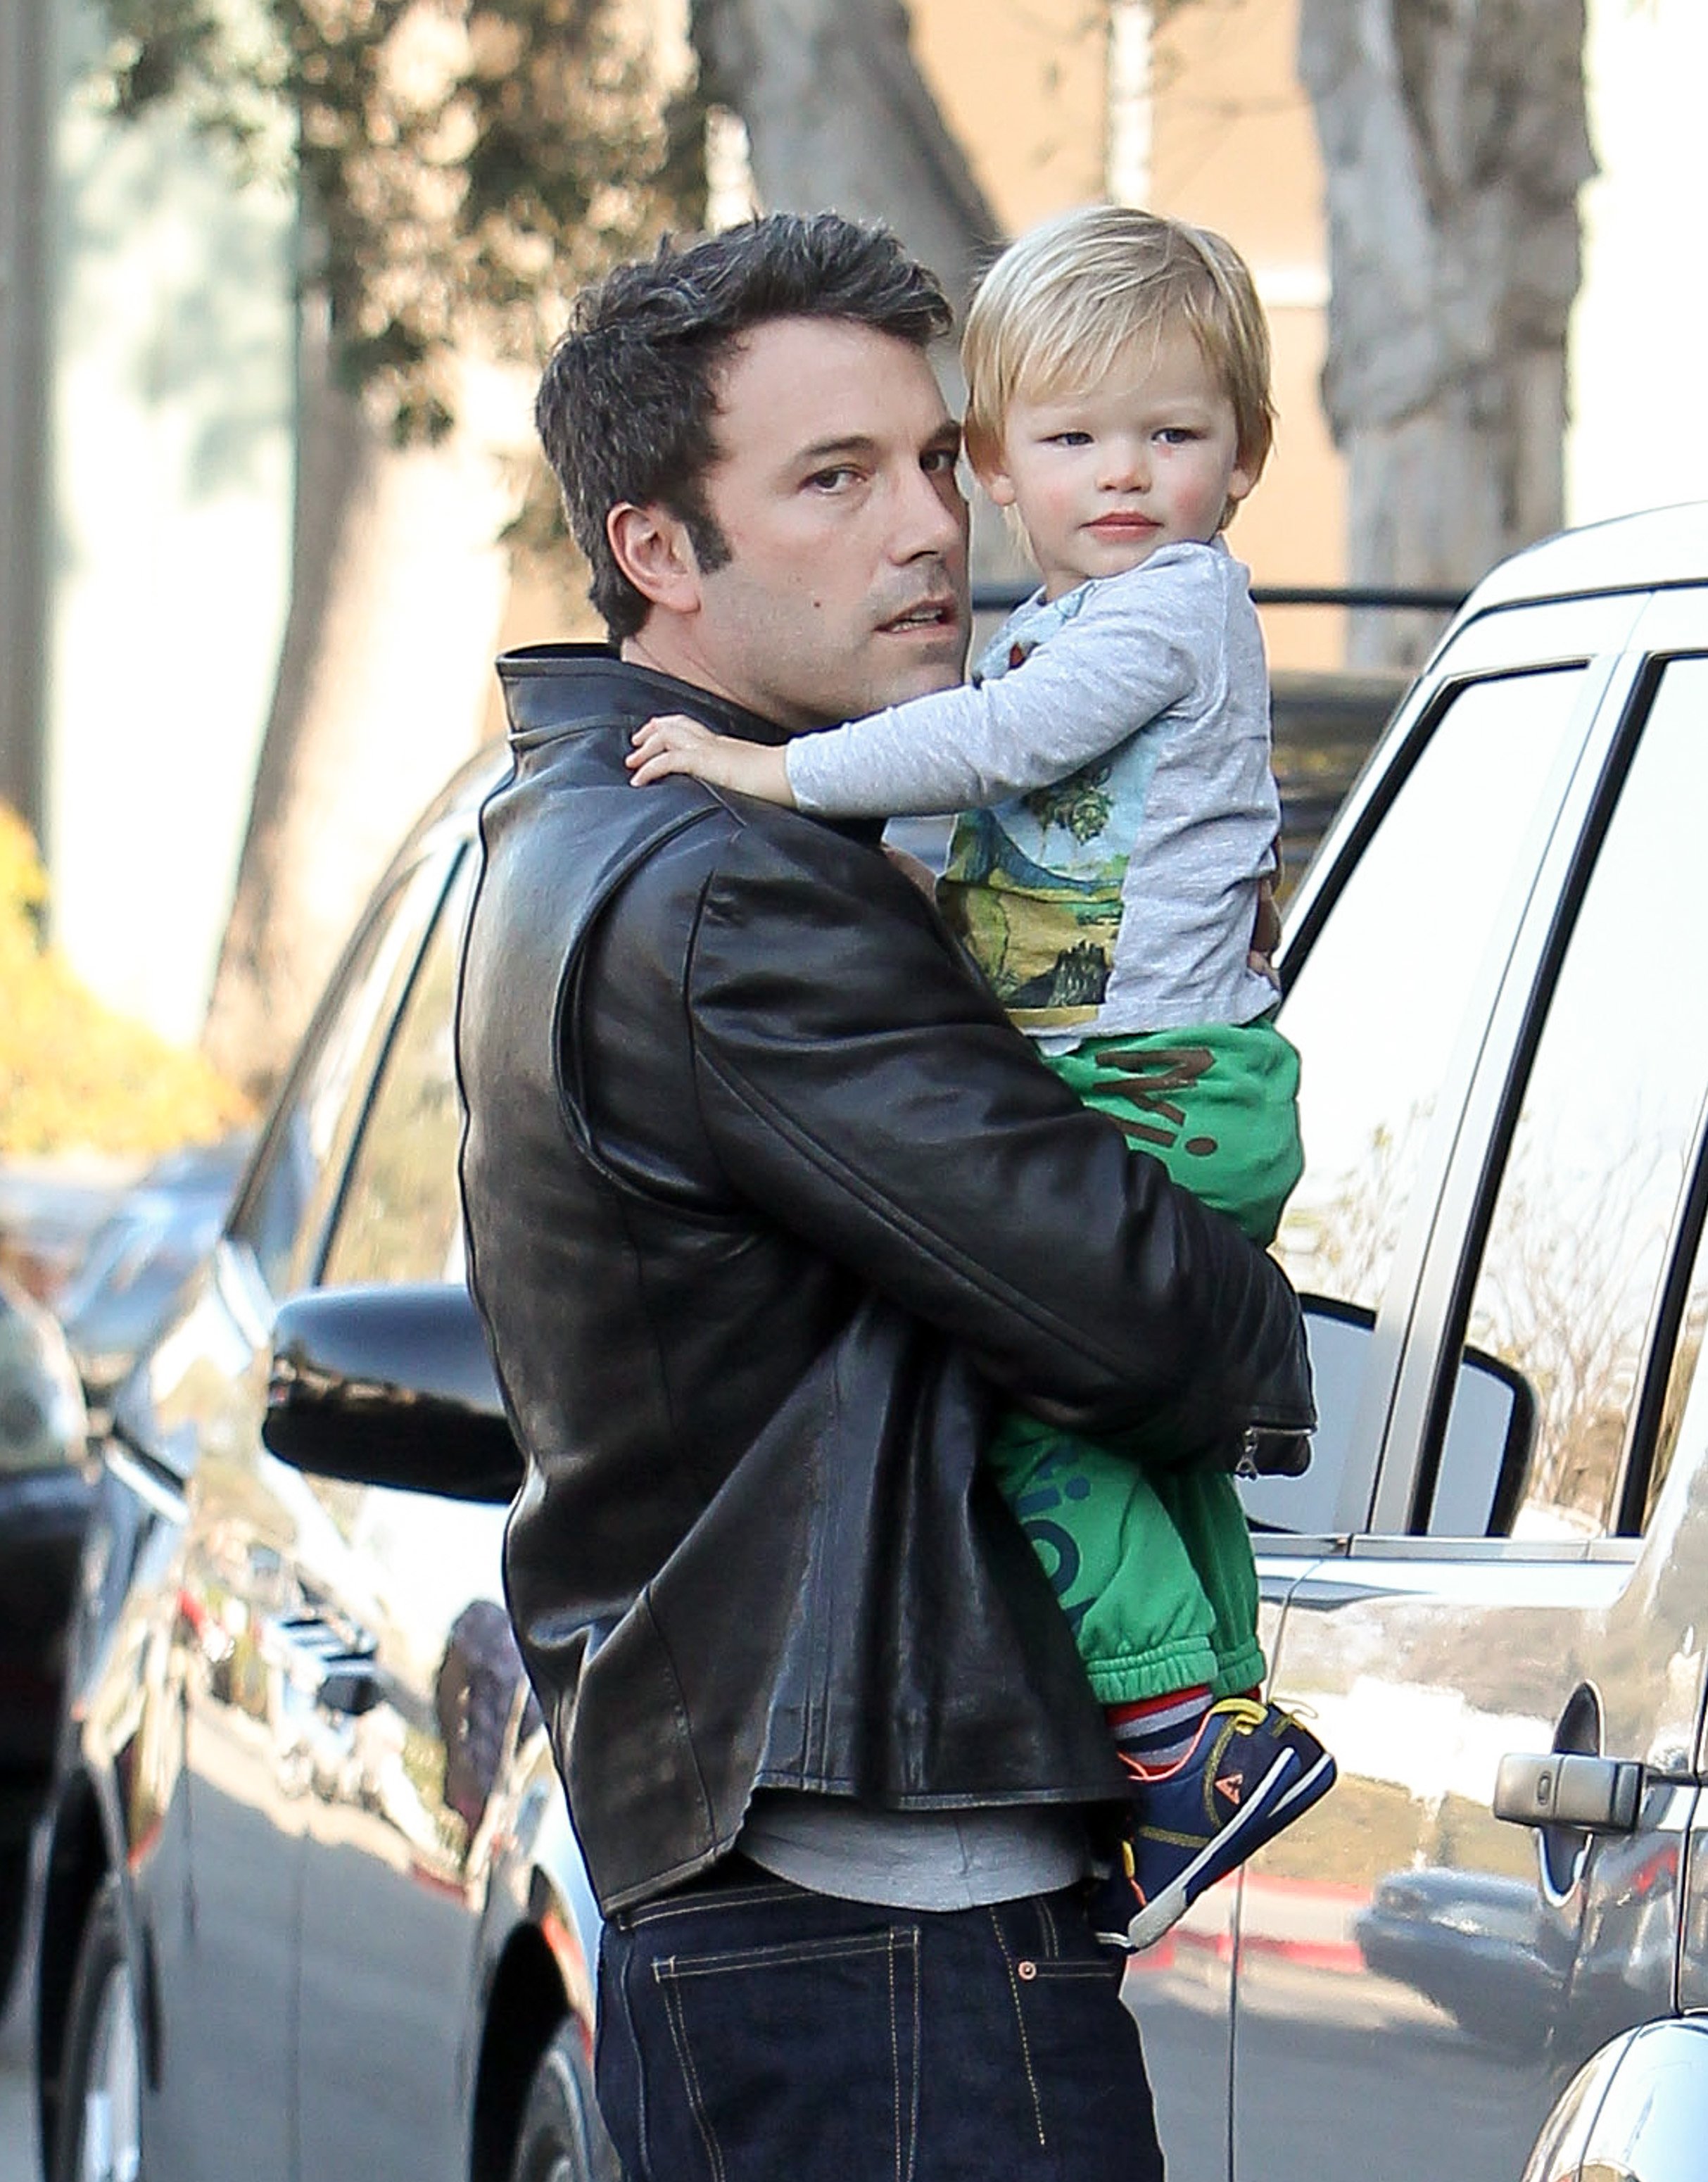 Ben and Samuel Affleck seen on November 9, 2013, in Los Angeles, California. | Source: Bauer-Griffin/FilmMagic/Getty Images